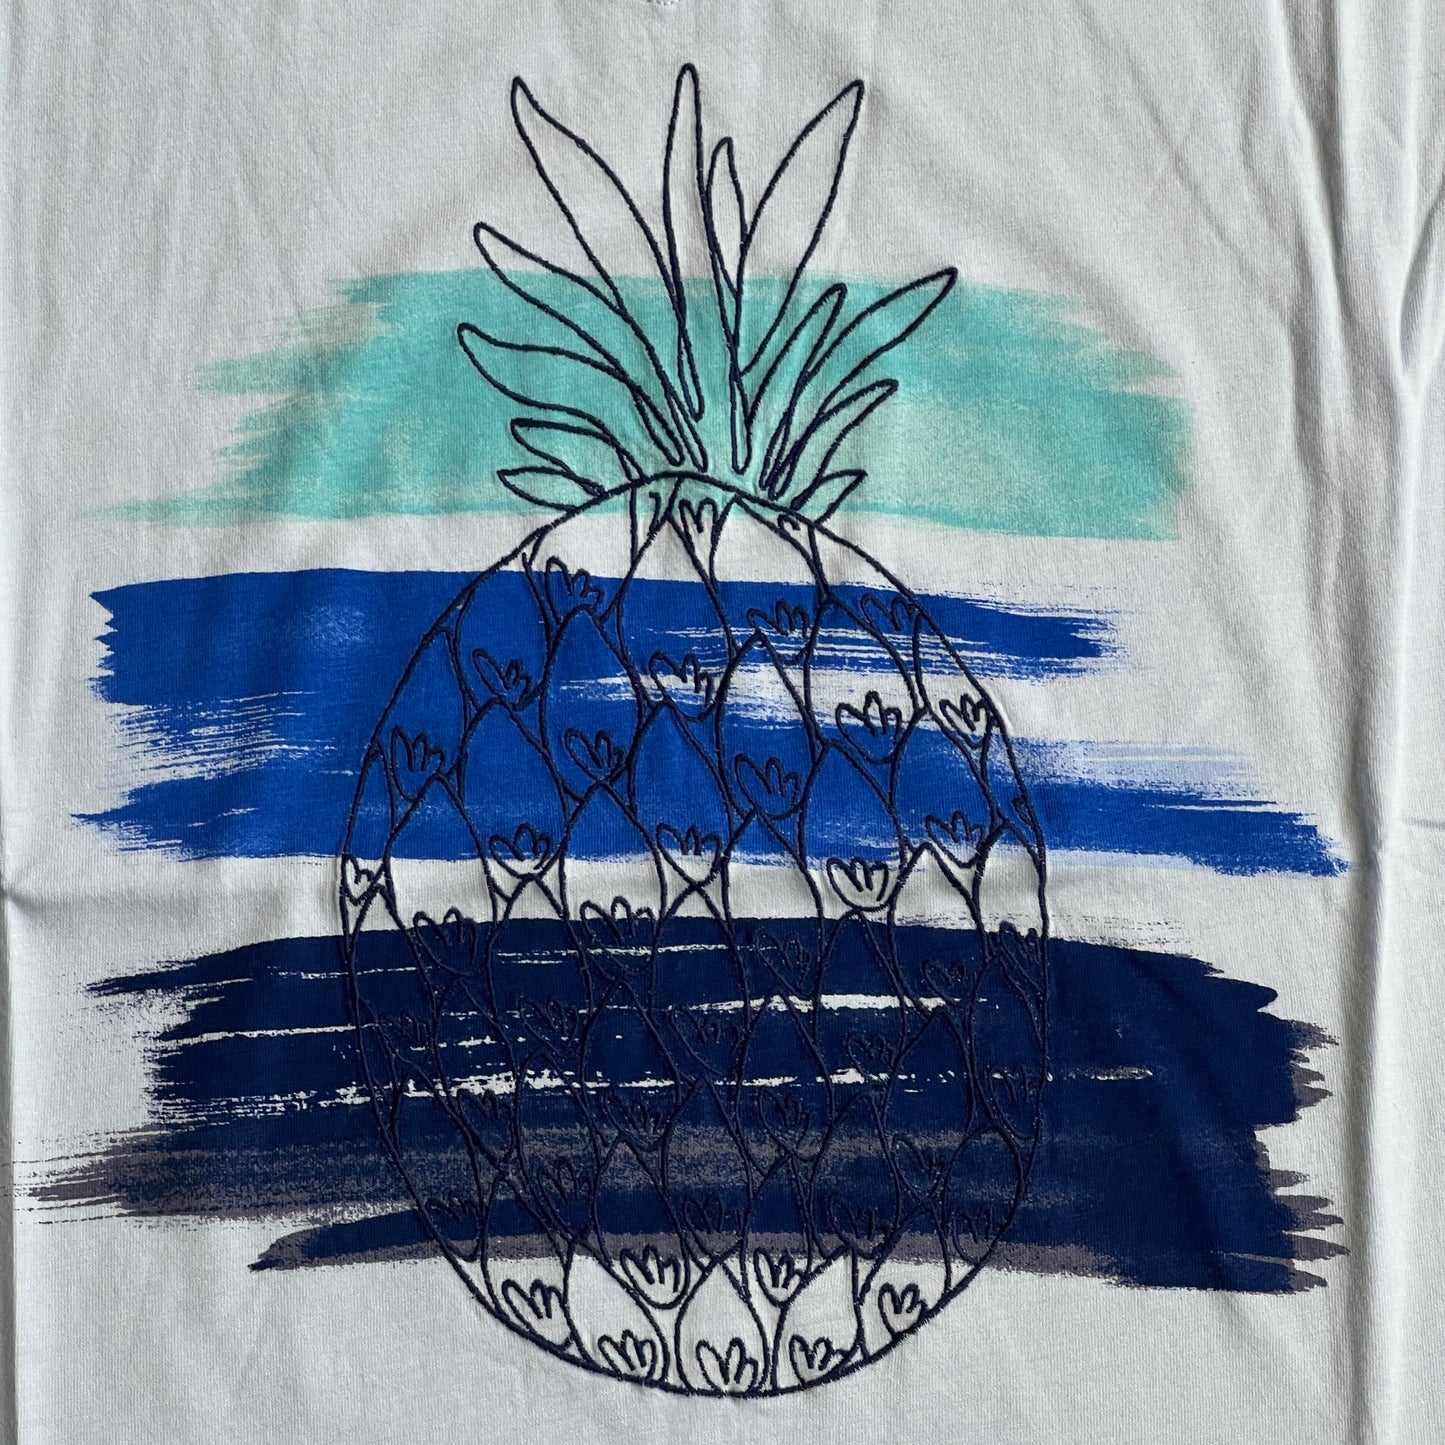 TOMMY BAHAMA Women's Seaport Painted Pineapple Tee T-shirt Dew Drop Size M (New)